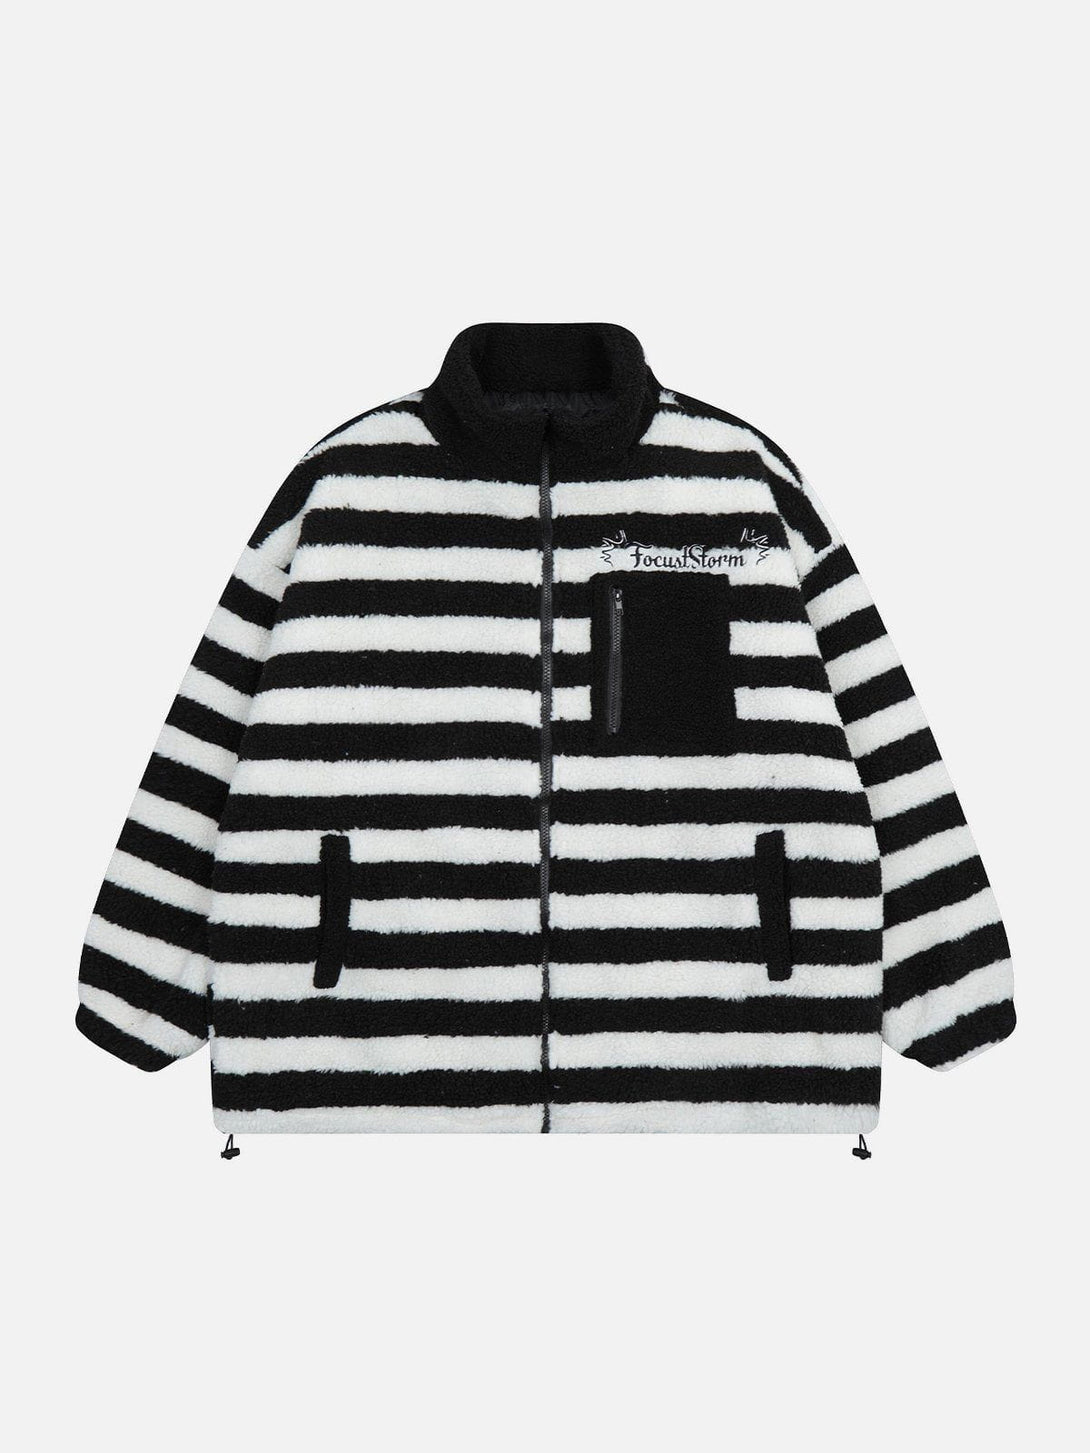 Majesda® - Vintage Alphabet Embroidered Stripe Colorblock Sherpa Coat outfit ideas streetwear fashion